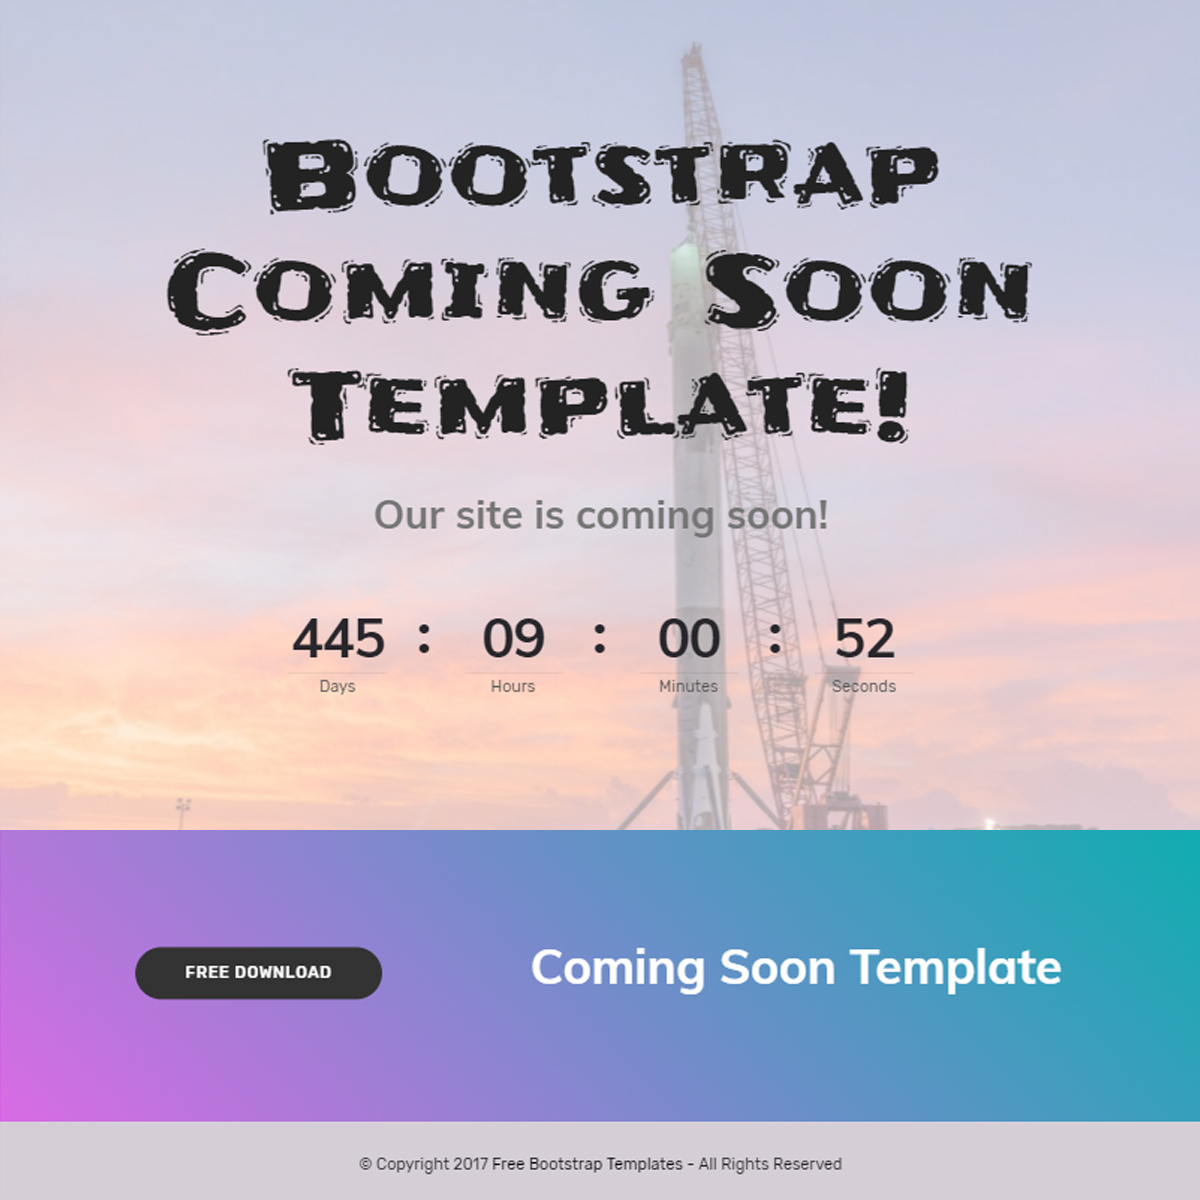 Responsive Bootstrap Coming Soon Templates